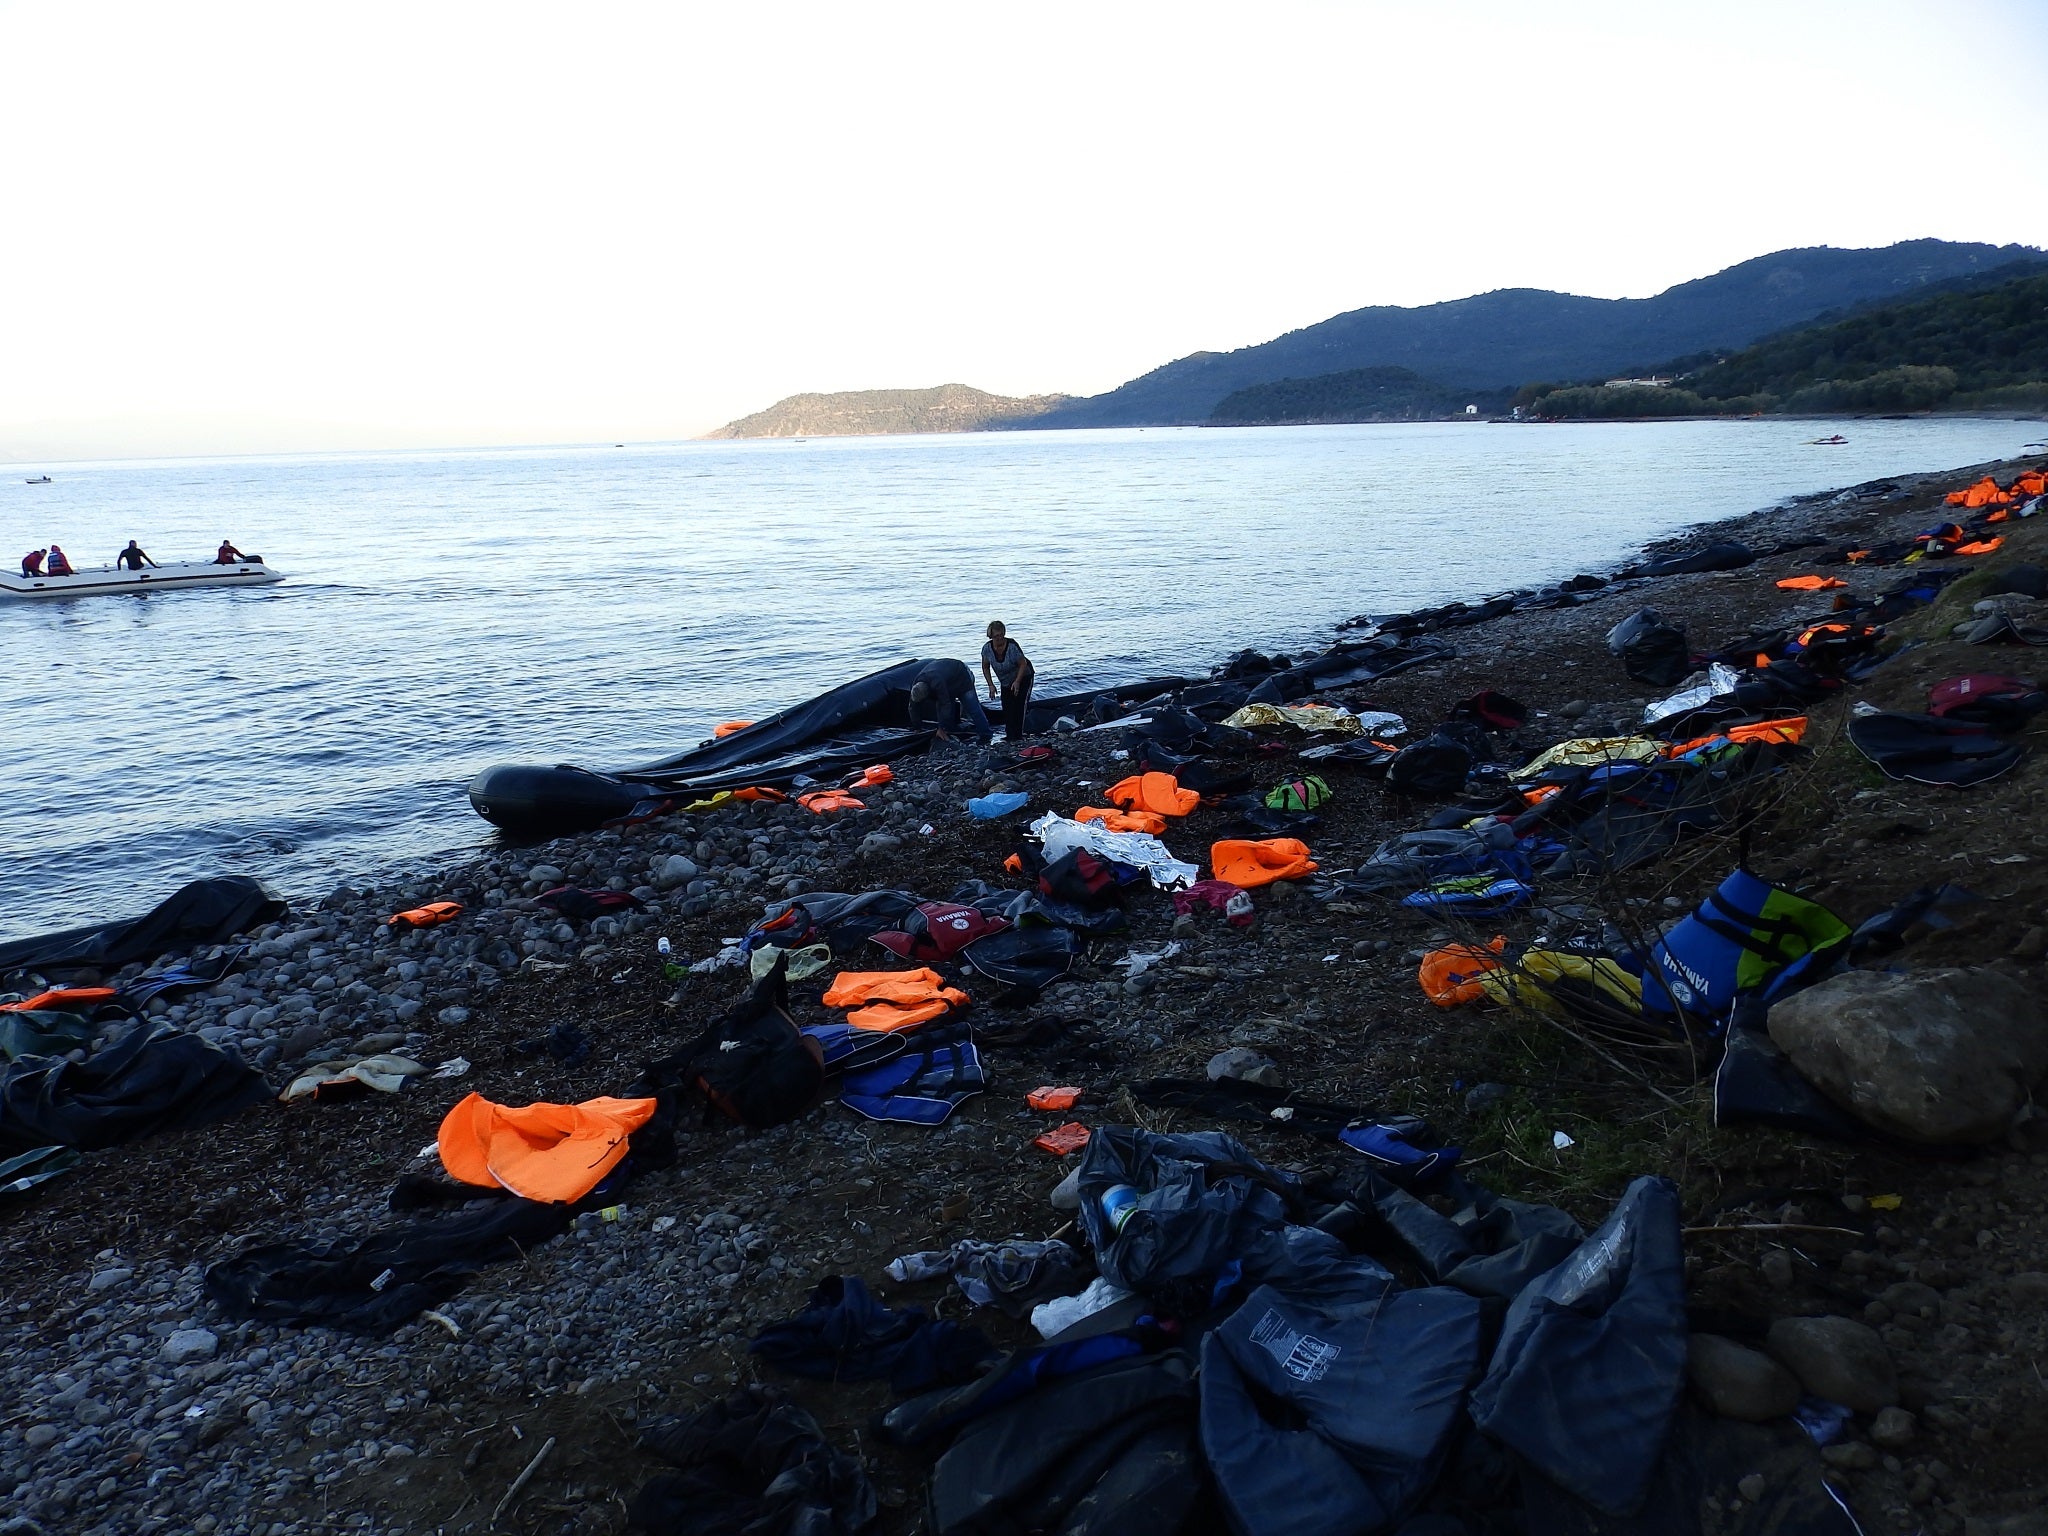 The aftermath of a refugee boat landing on a beach near Molyvos, Lesbos, on 4 November.